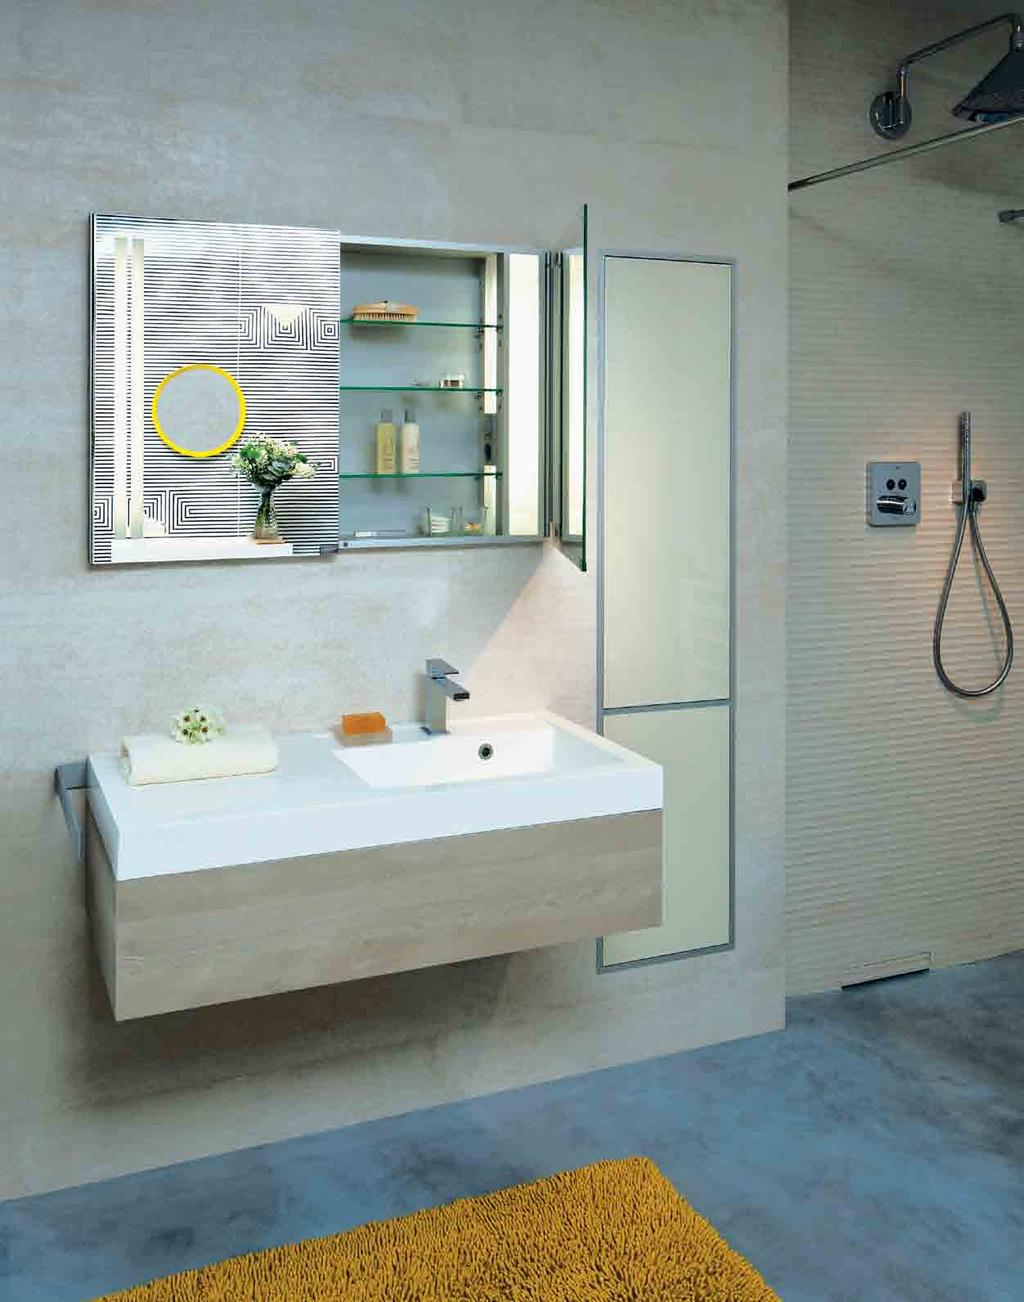 VESTA Alluminium bathroom and WC furniture Wall-mounted and built-in design, aluminium silver satin anodized water-resistant corpus, double-sided doors - outside colour LACOBEL glass RAL 9003 /